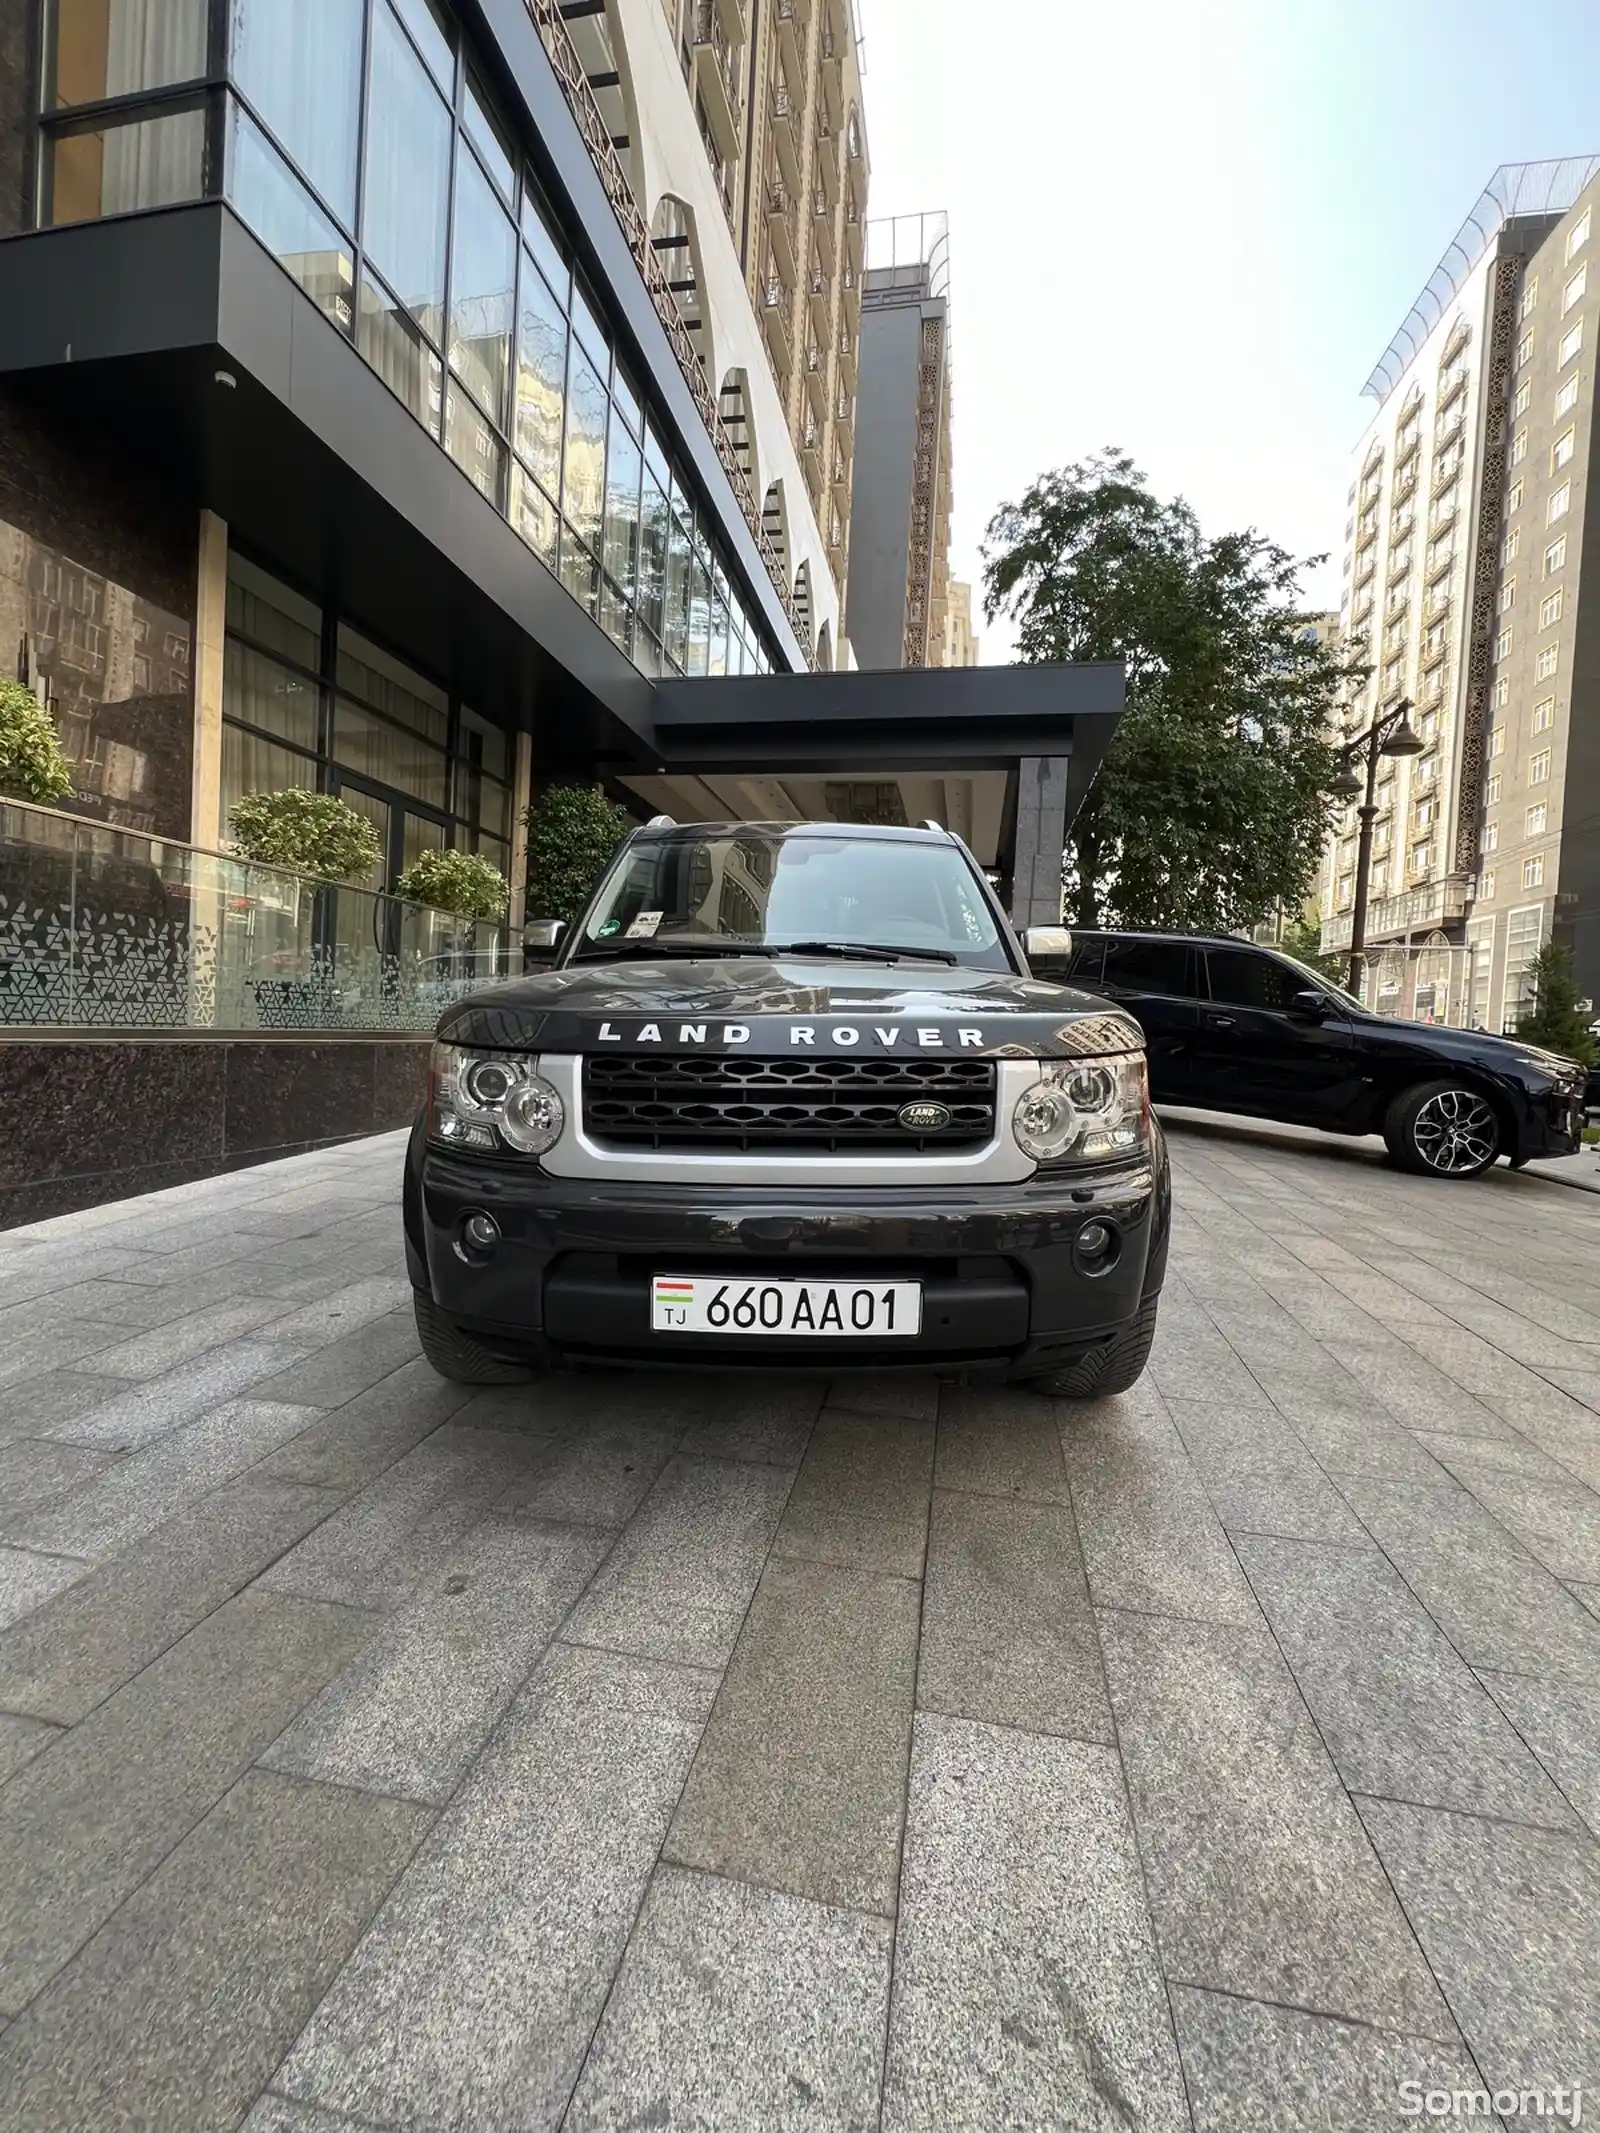 Land Rover Discovery, 2013-1